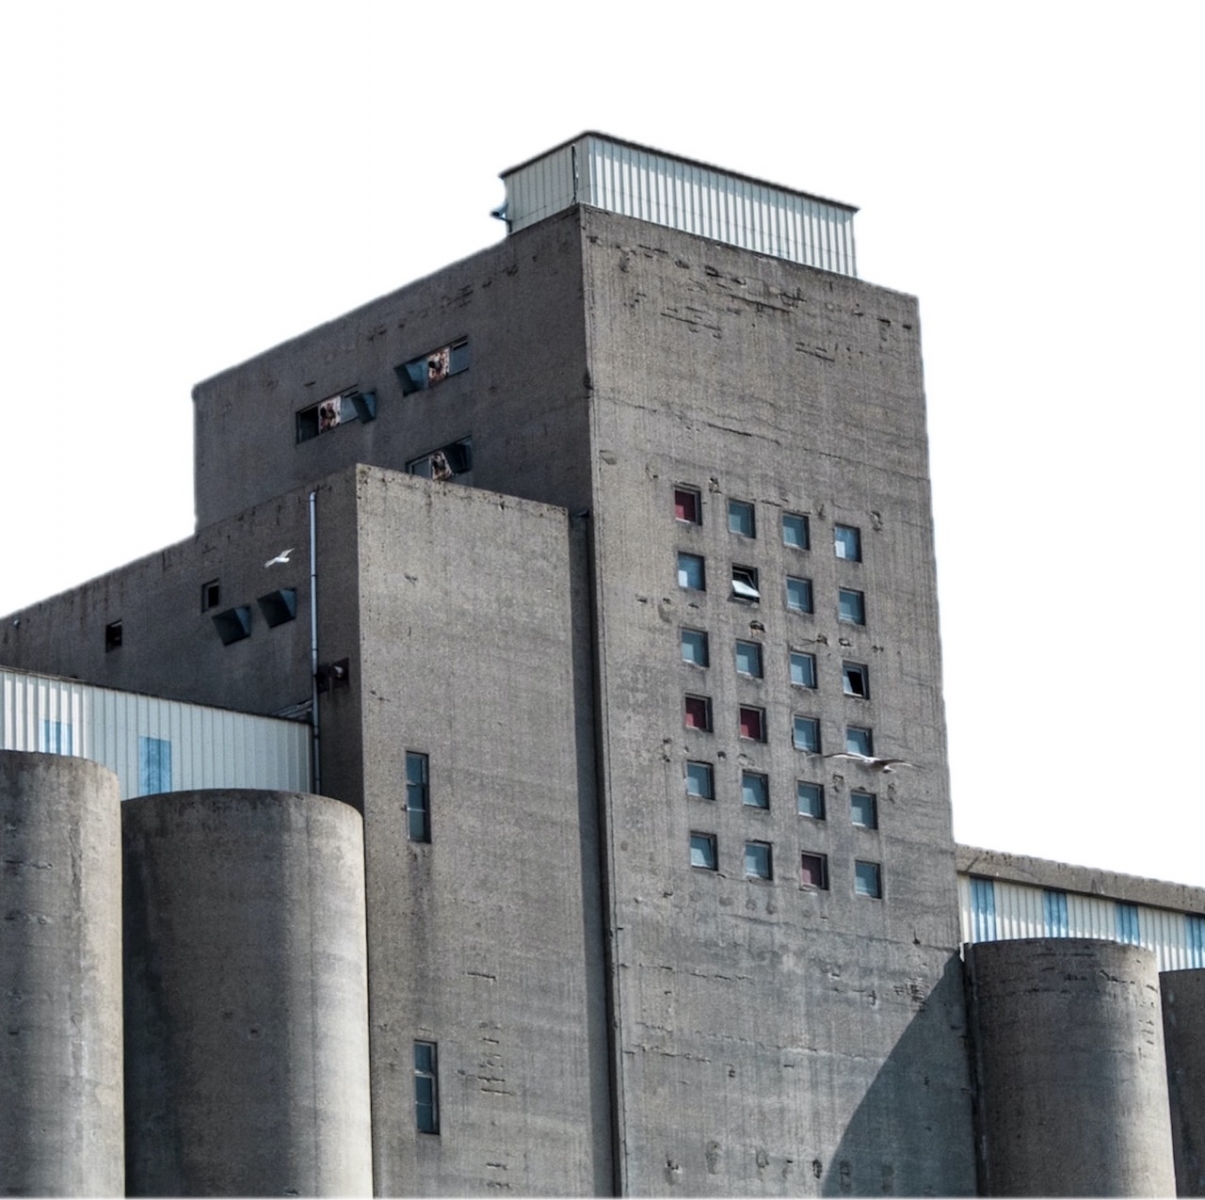 Concrete & abandoned building of Grain silos at the port of Le Havre was partly deconstructed in 2020-2021 Large